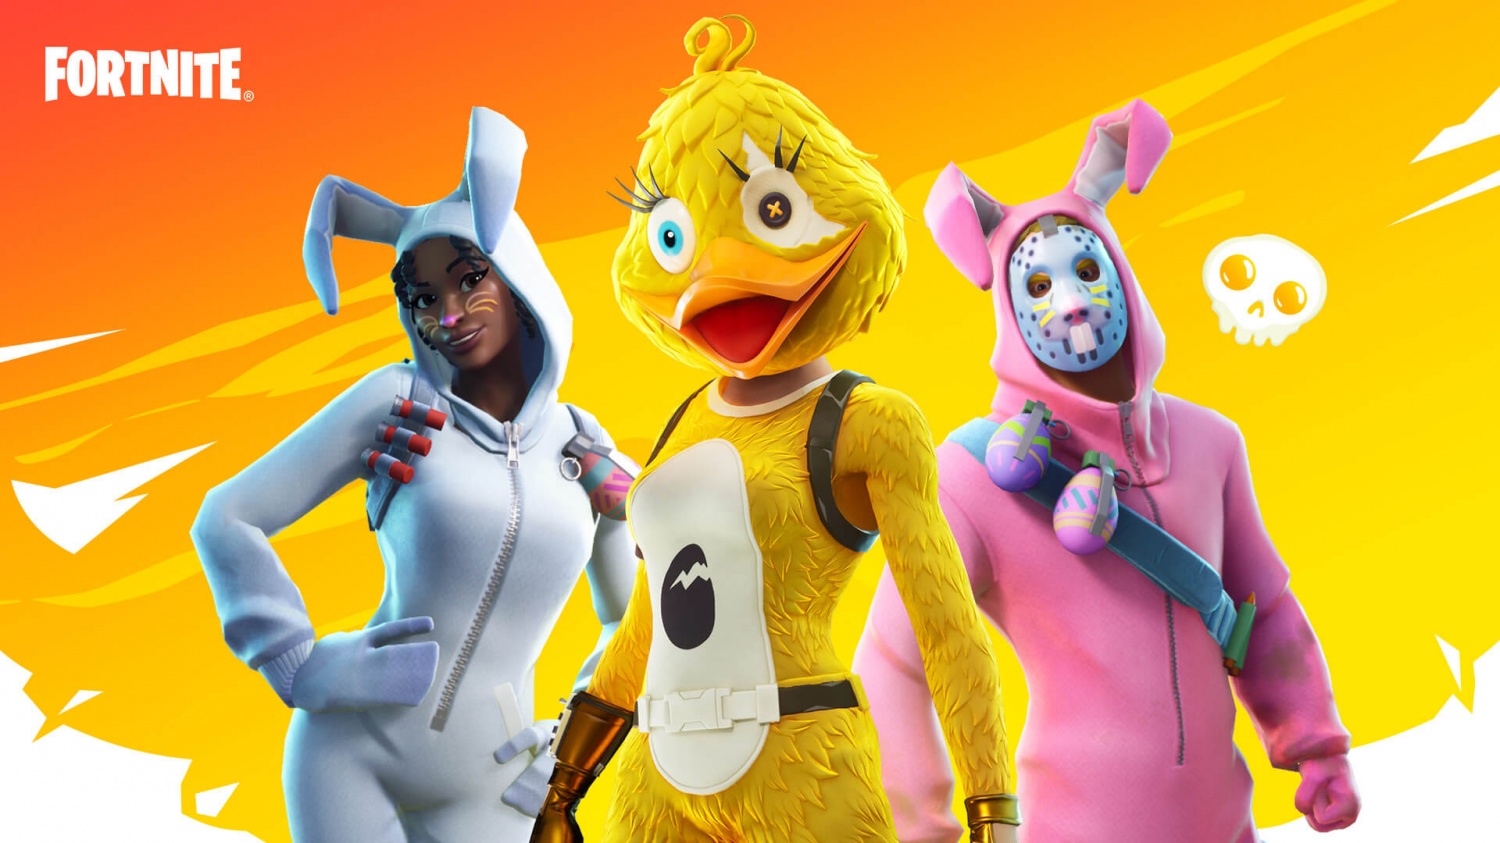 'Fortnite' Easter Eggs: 10 Locations to Find Bouncy Eggs and Earn Tactical Quaxes